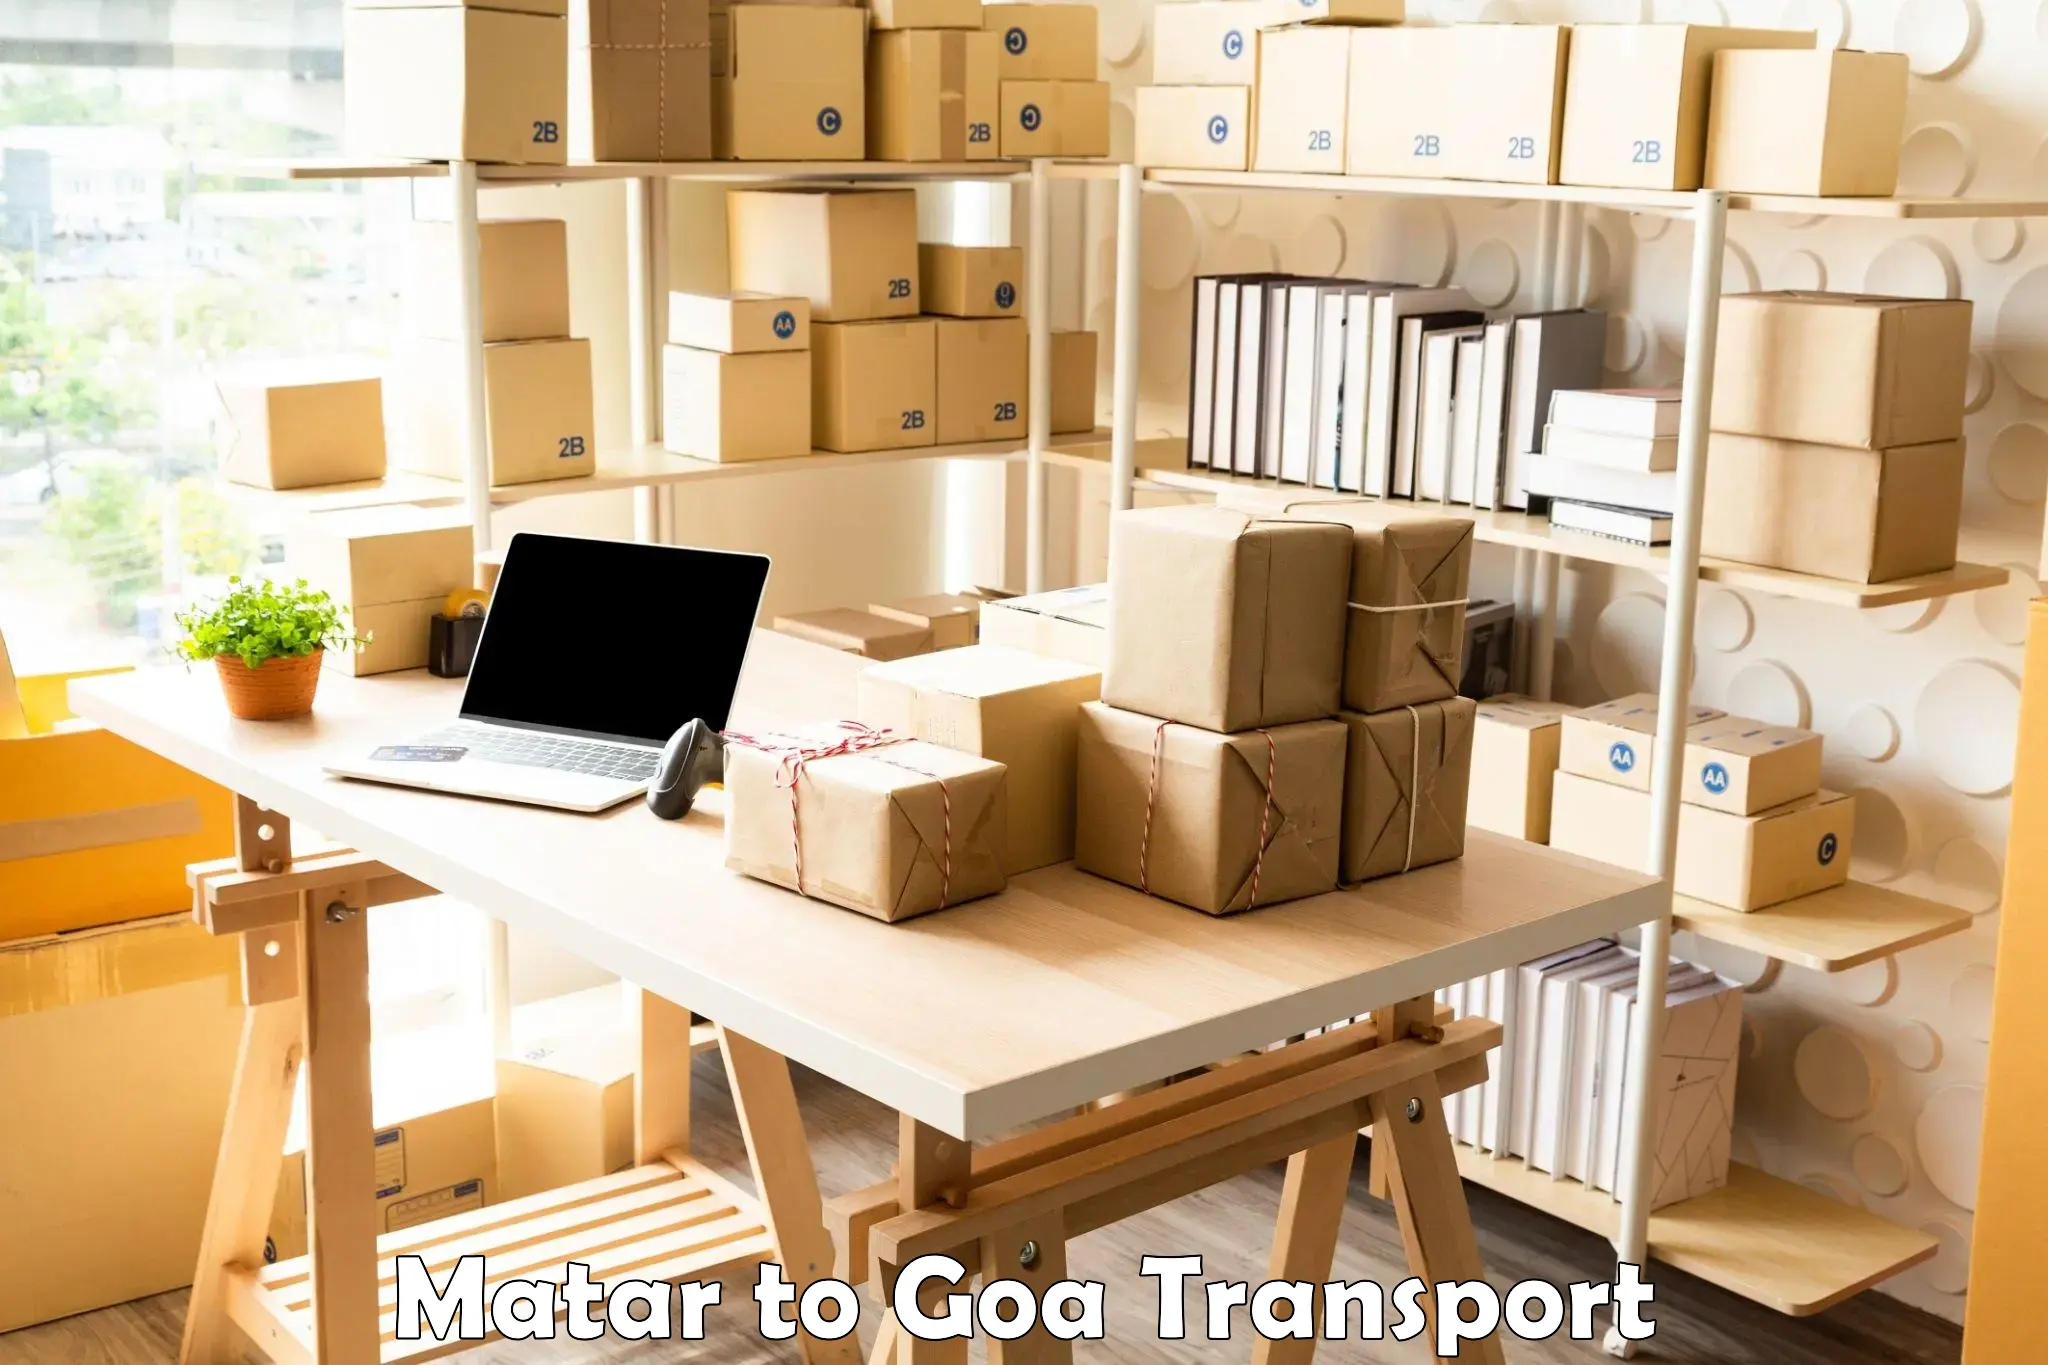 Transport bike from one state to another Matar to Goa University